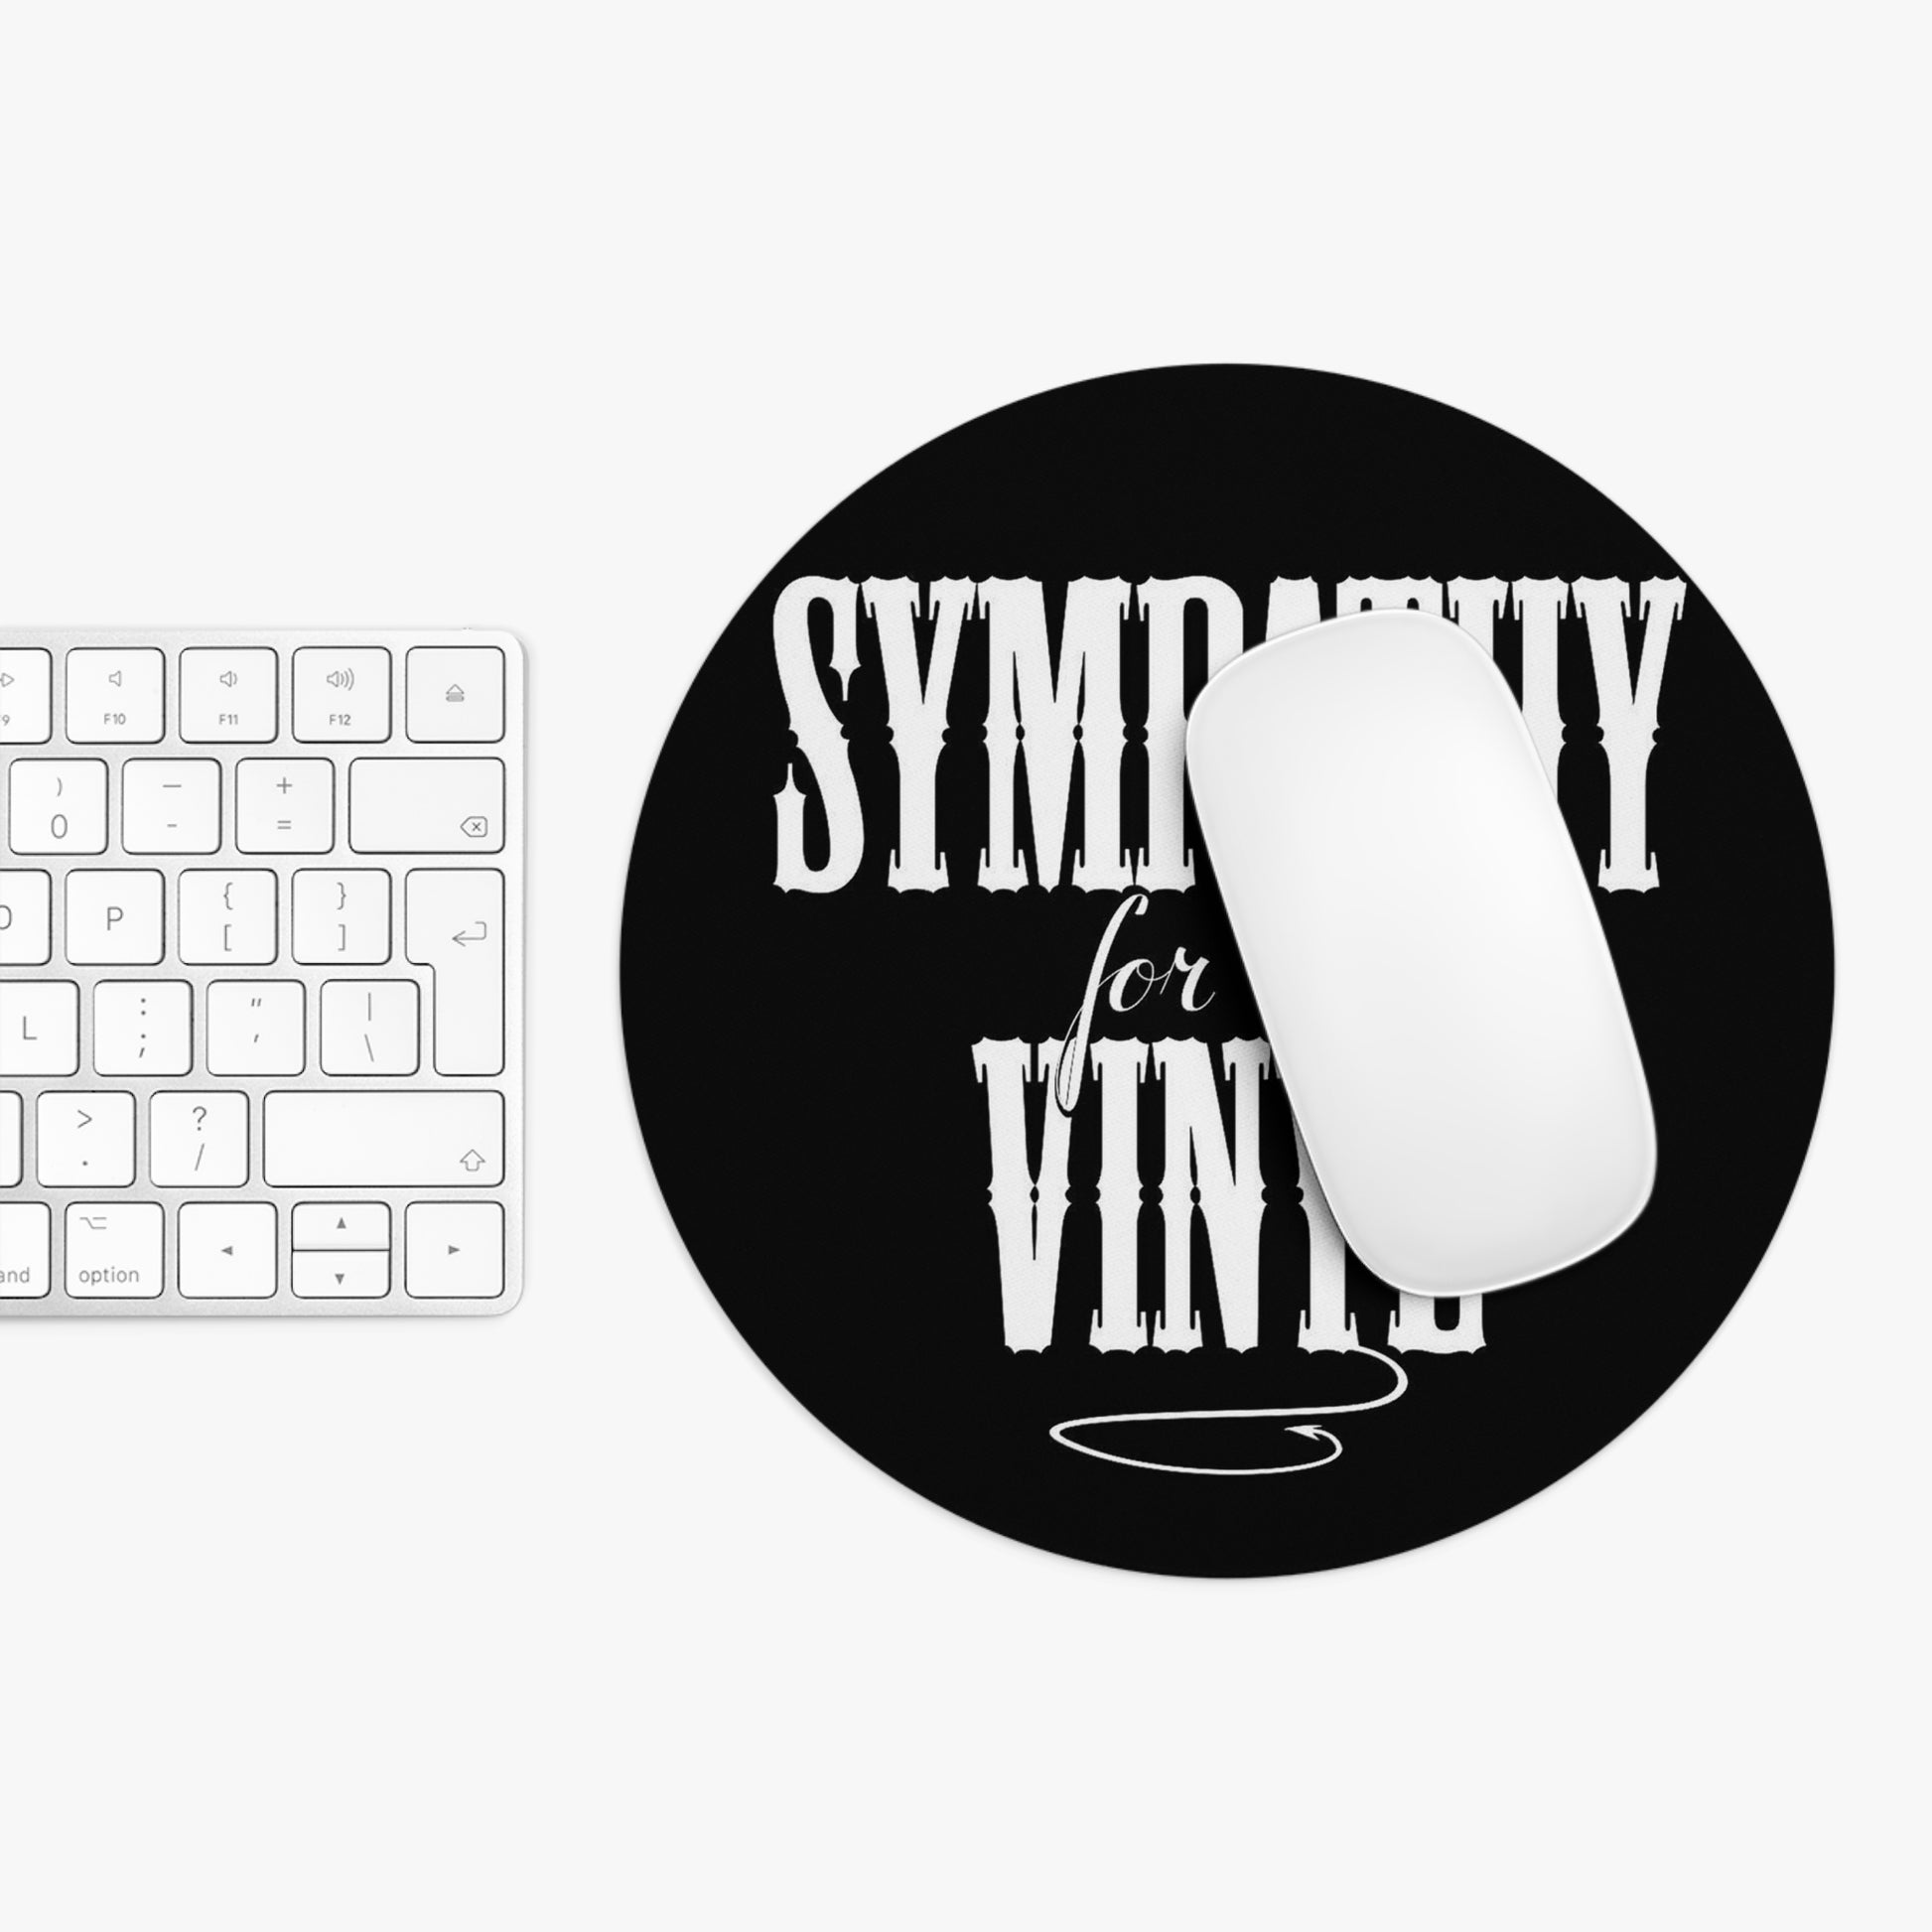 Vinyl Record Themed Mouse Pad Sympathy for the Vinyl Print with mouse and laptop